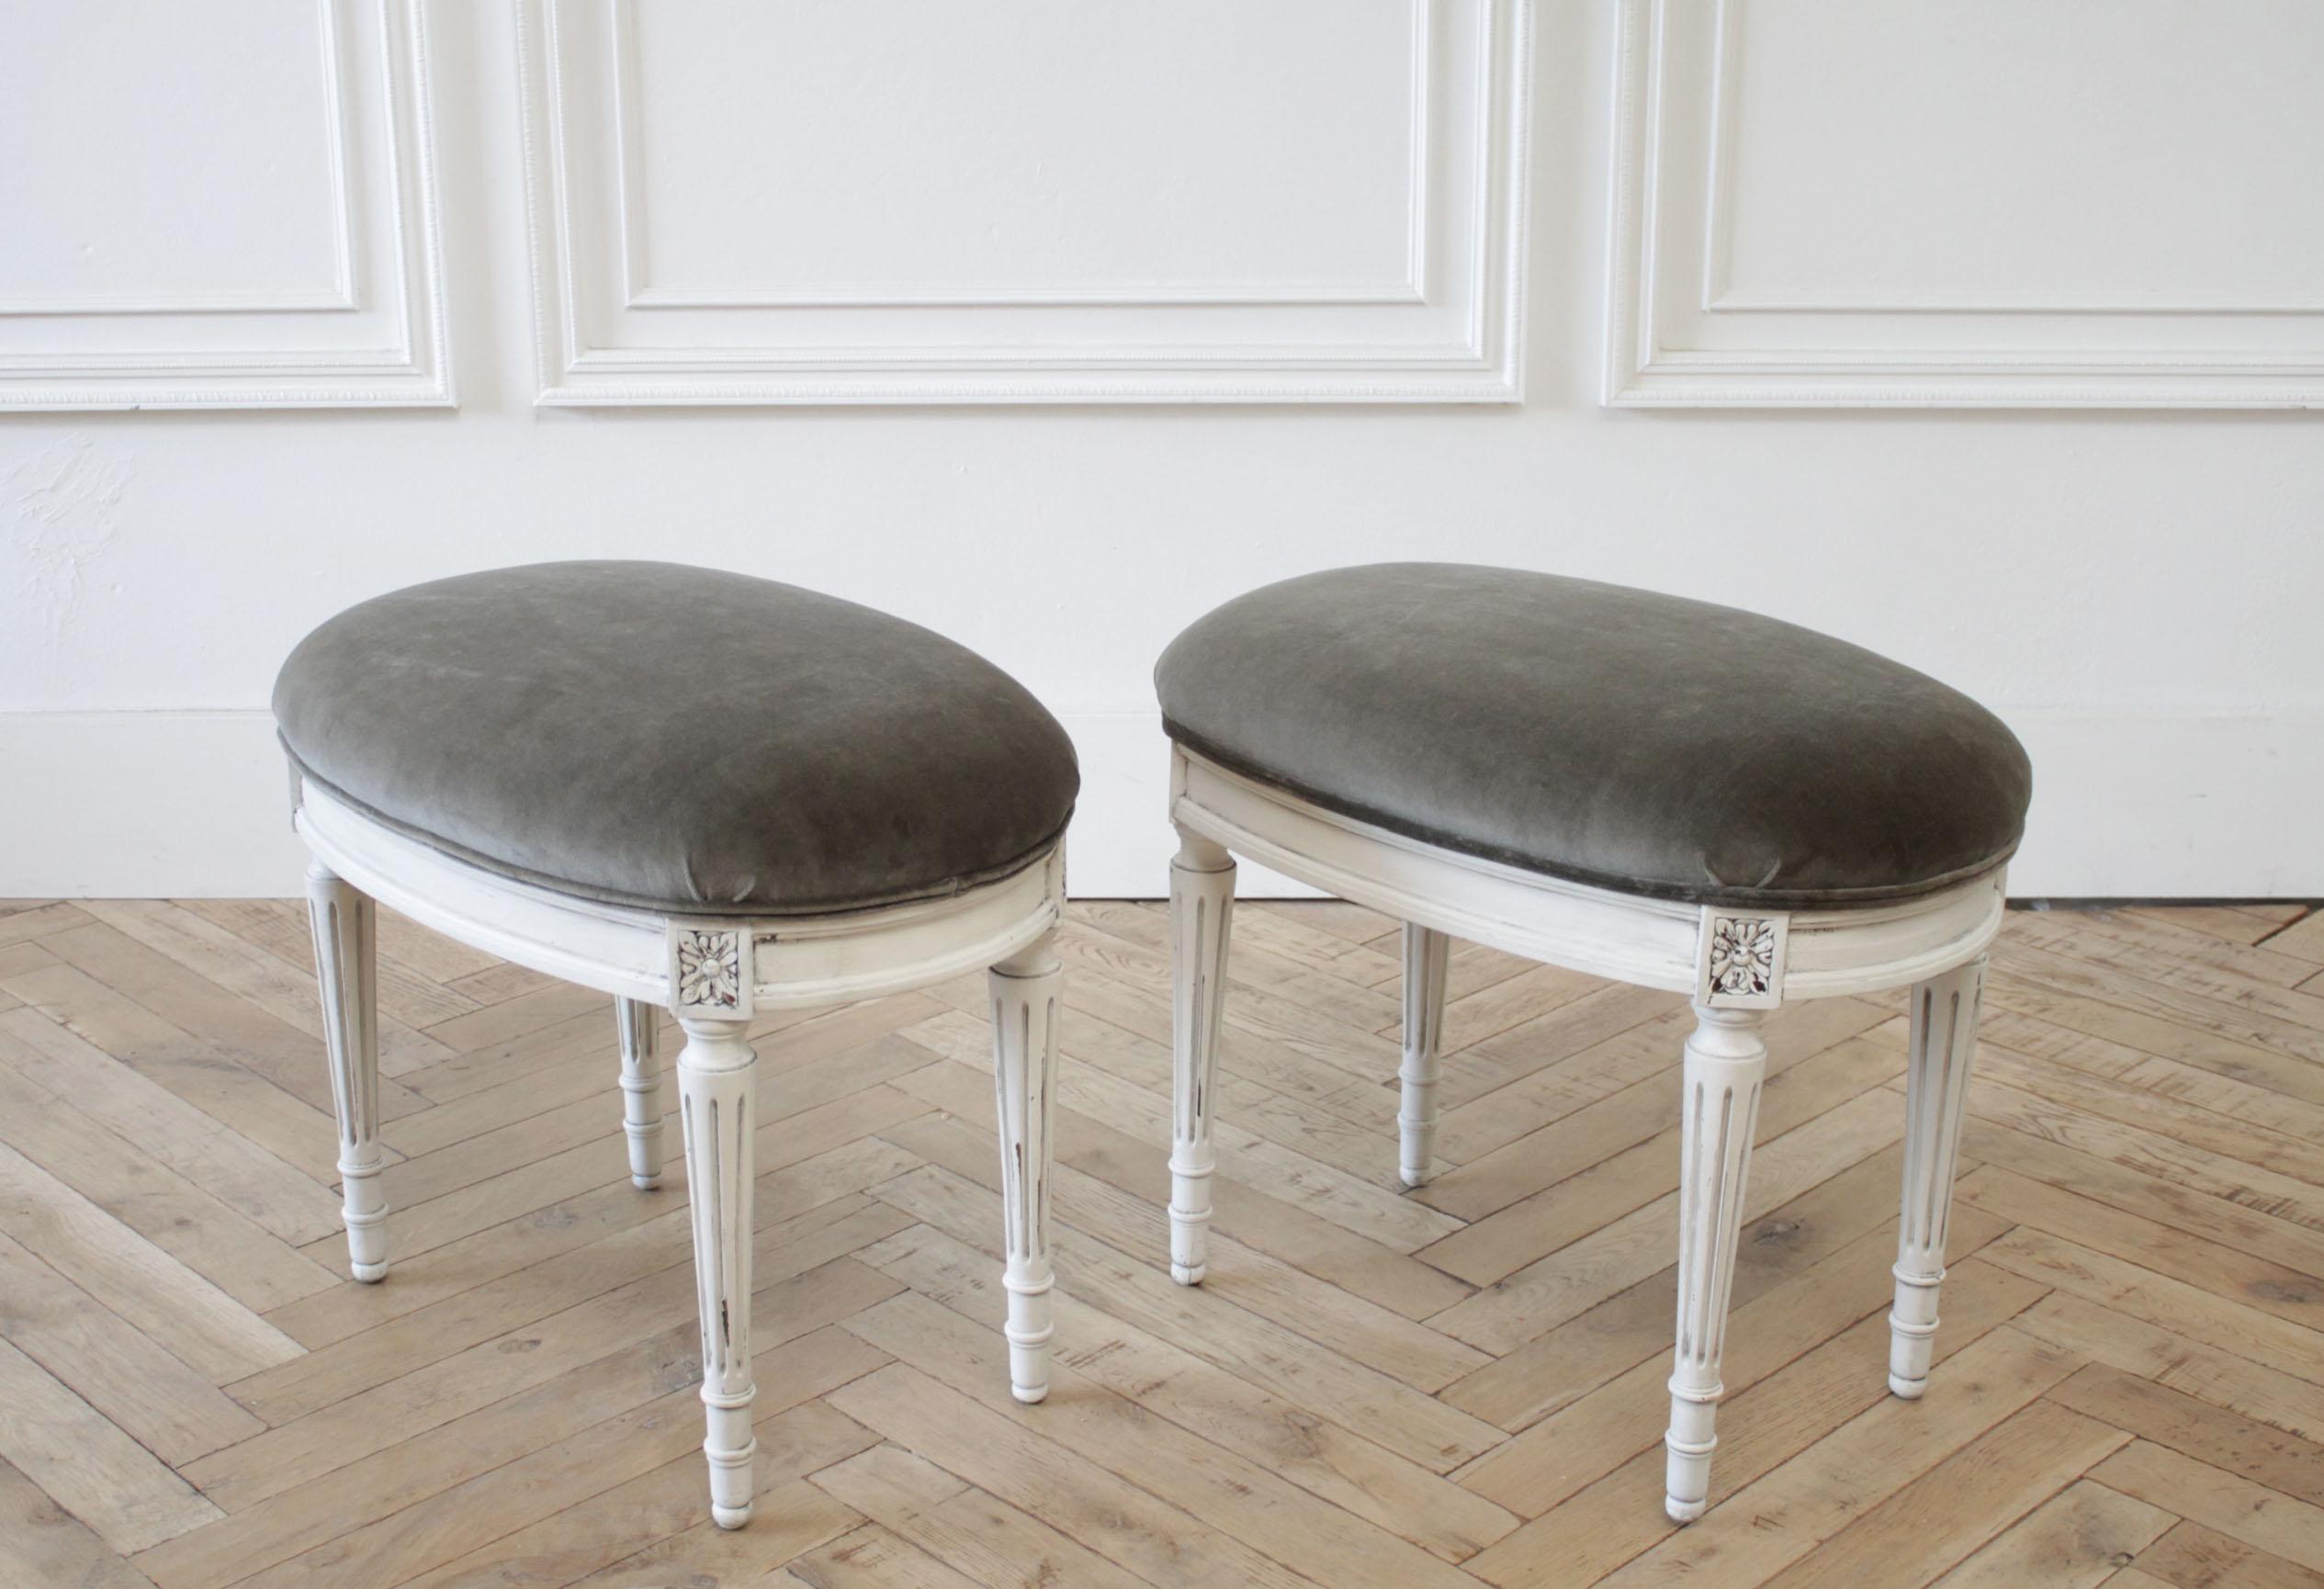 Pair of 20th century Louis XVI style painted and velvet upholstered ottomans
Painted in a soft oyster white, with subtle distressed edges, and antique glazed patina.
These are upholstered in a deep olive-gray vintage style velvet. Upholstery is